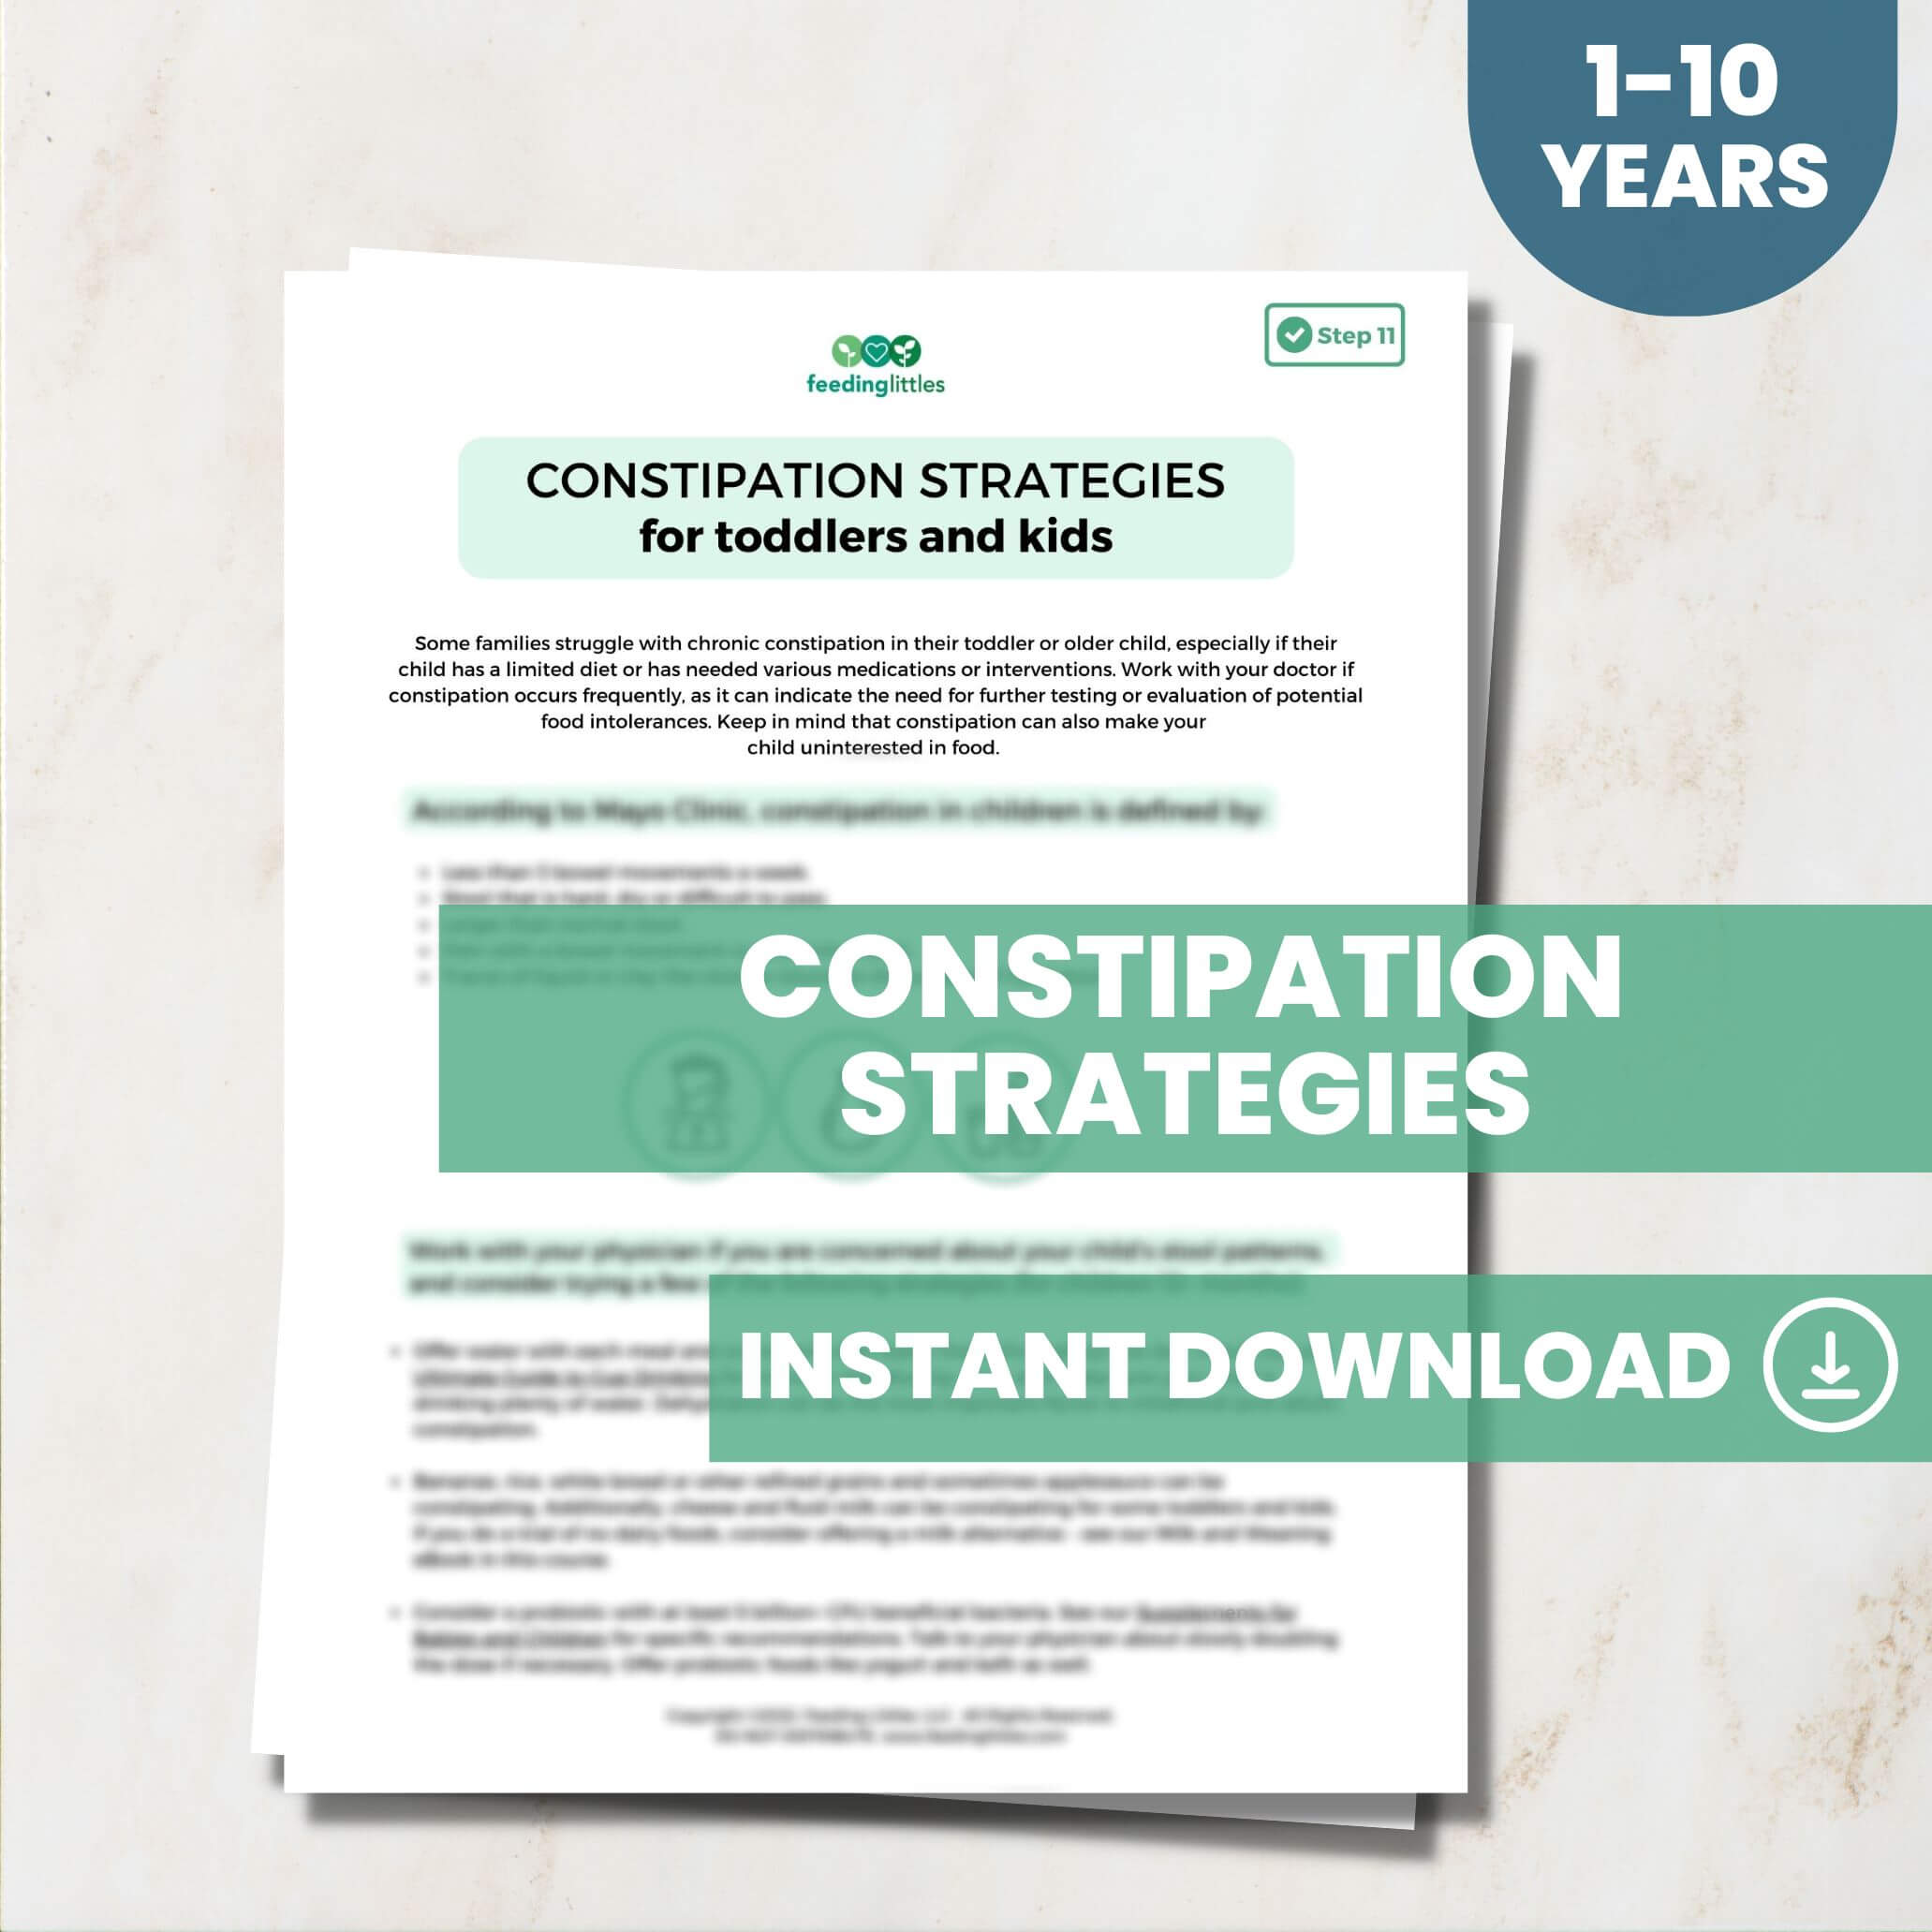 Constipation Strategies for Toddlers and Kids